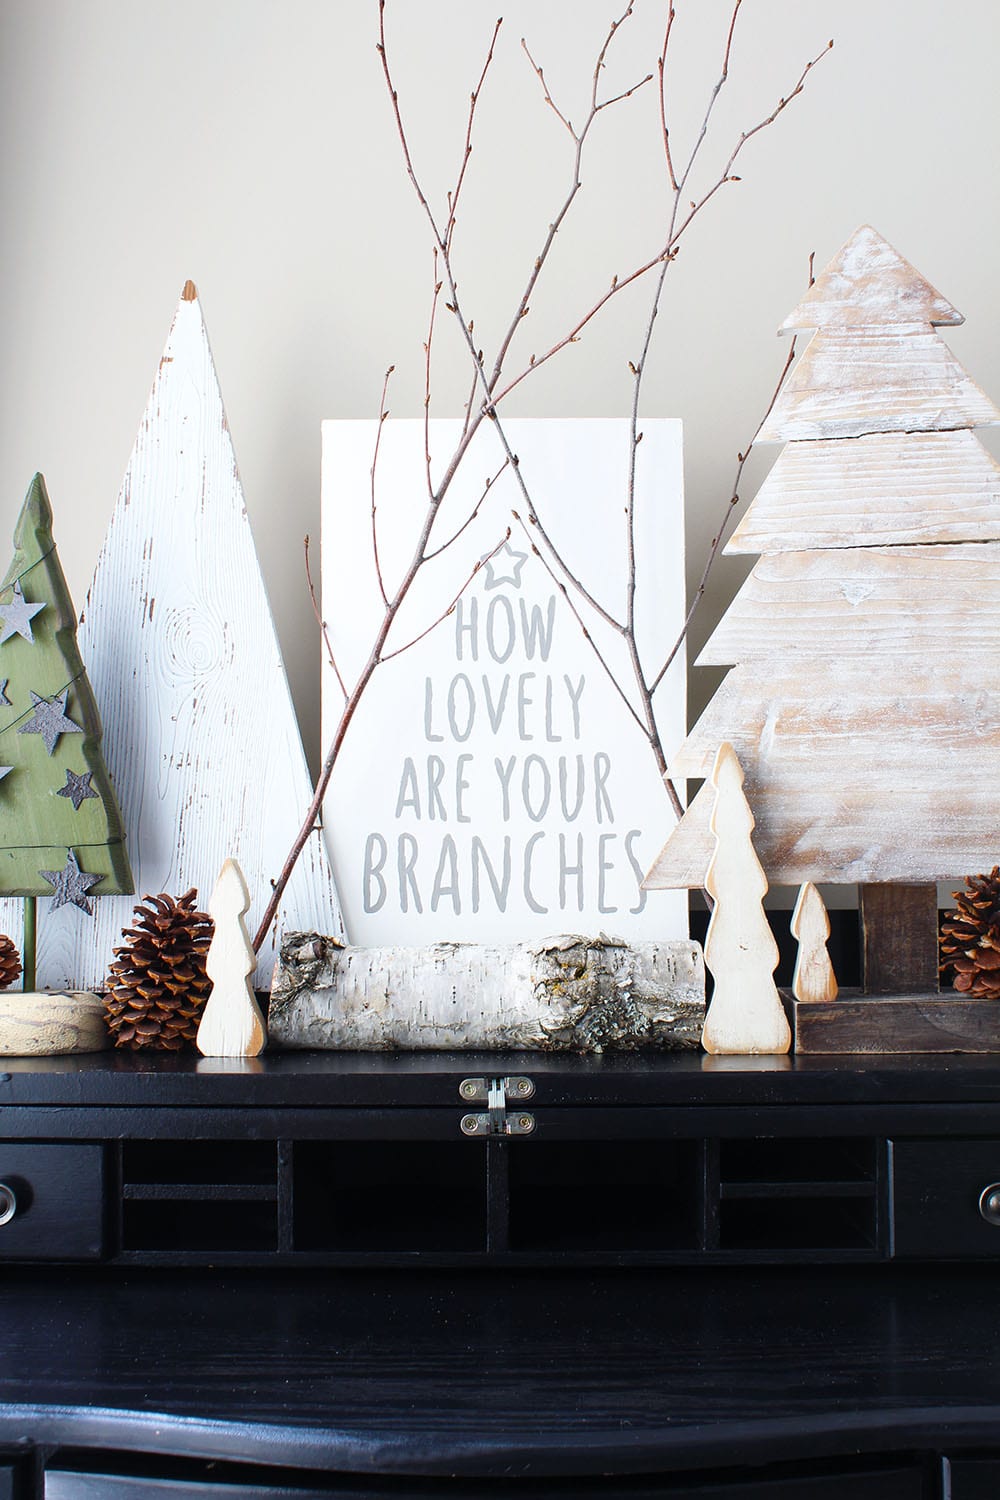 Looking for holiday decor projects? Try this Christmas tree sign, which uses eco-friendly materials and is just as green as a Christmas tree!